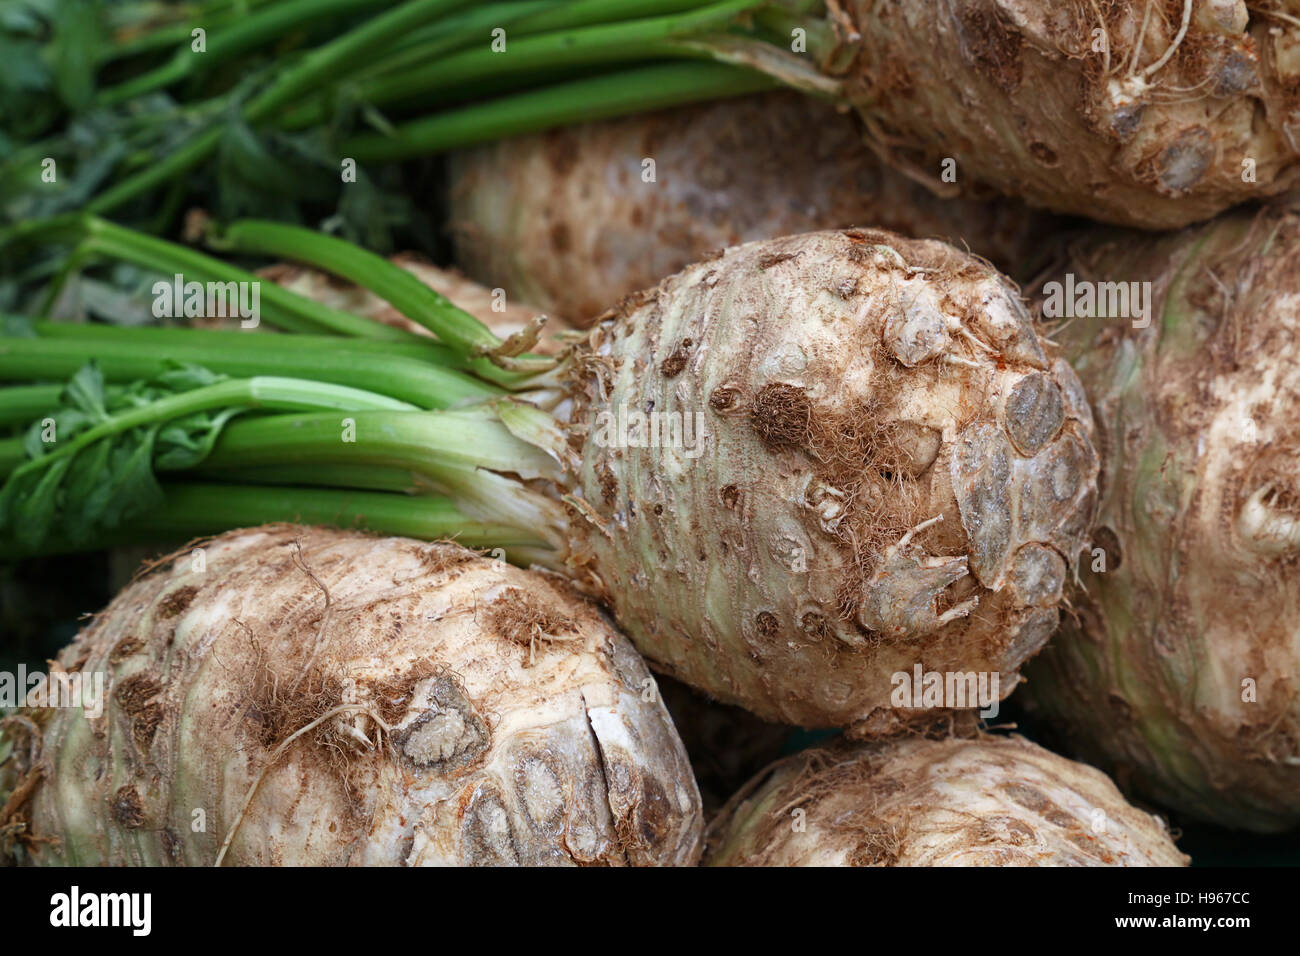 Knob turnip rooted celery with green stalk bunch on fresh food market stall, close up, low angle view, Stock Photo